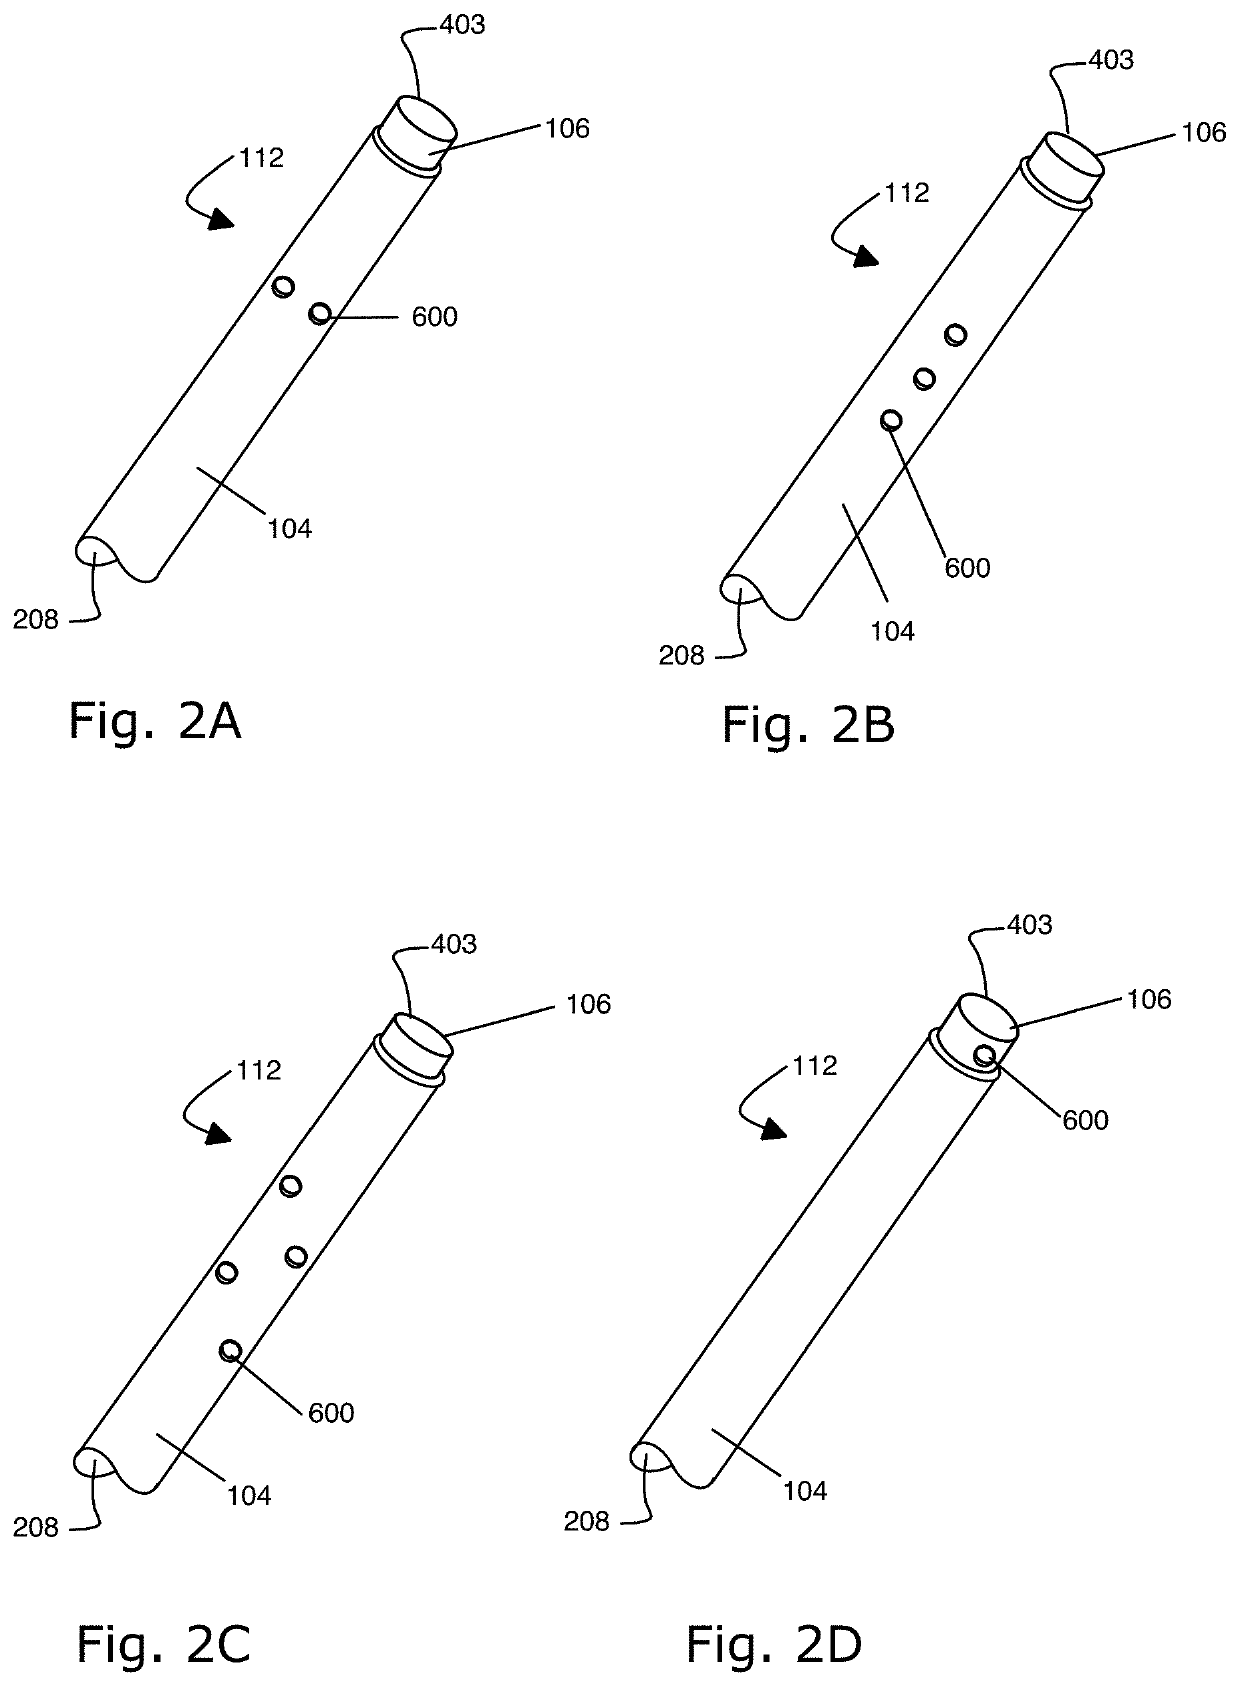 Connector system for electrosurgical device